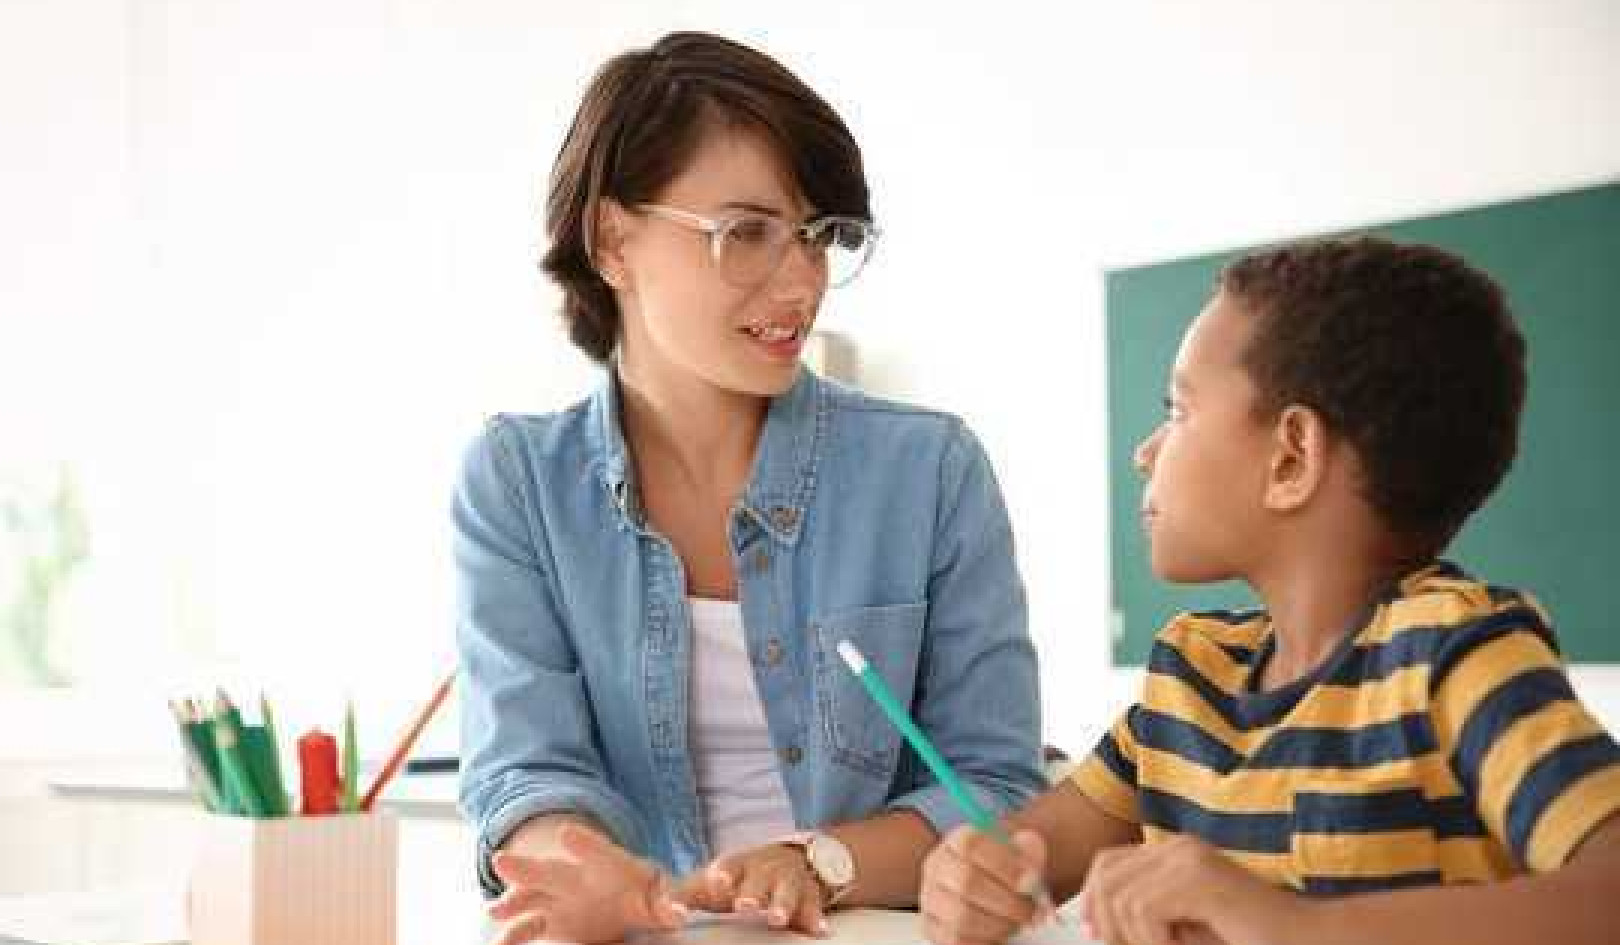 5 Things To Consider Before You Hire A Tutor For Your Child